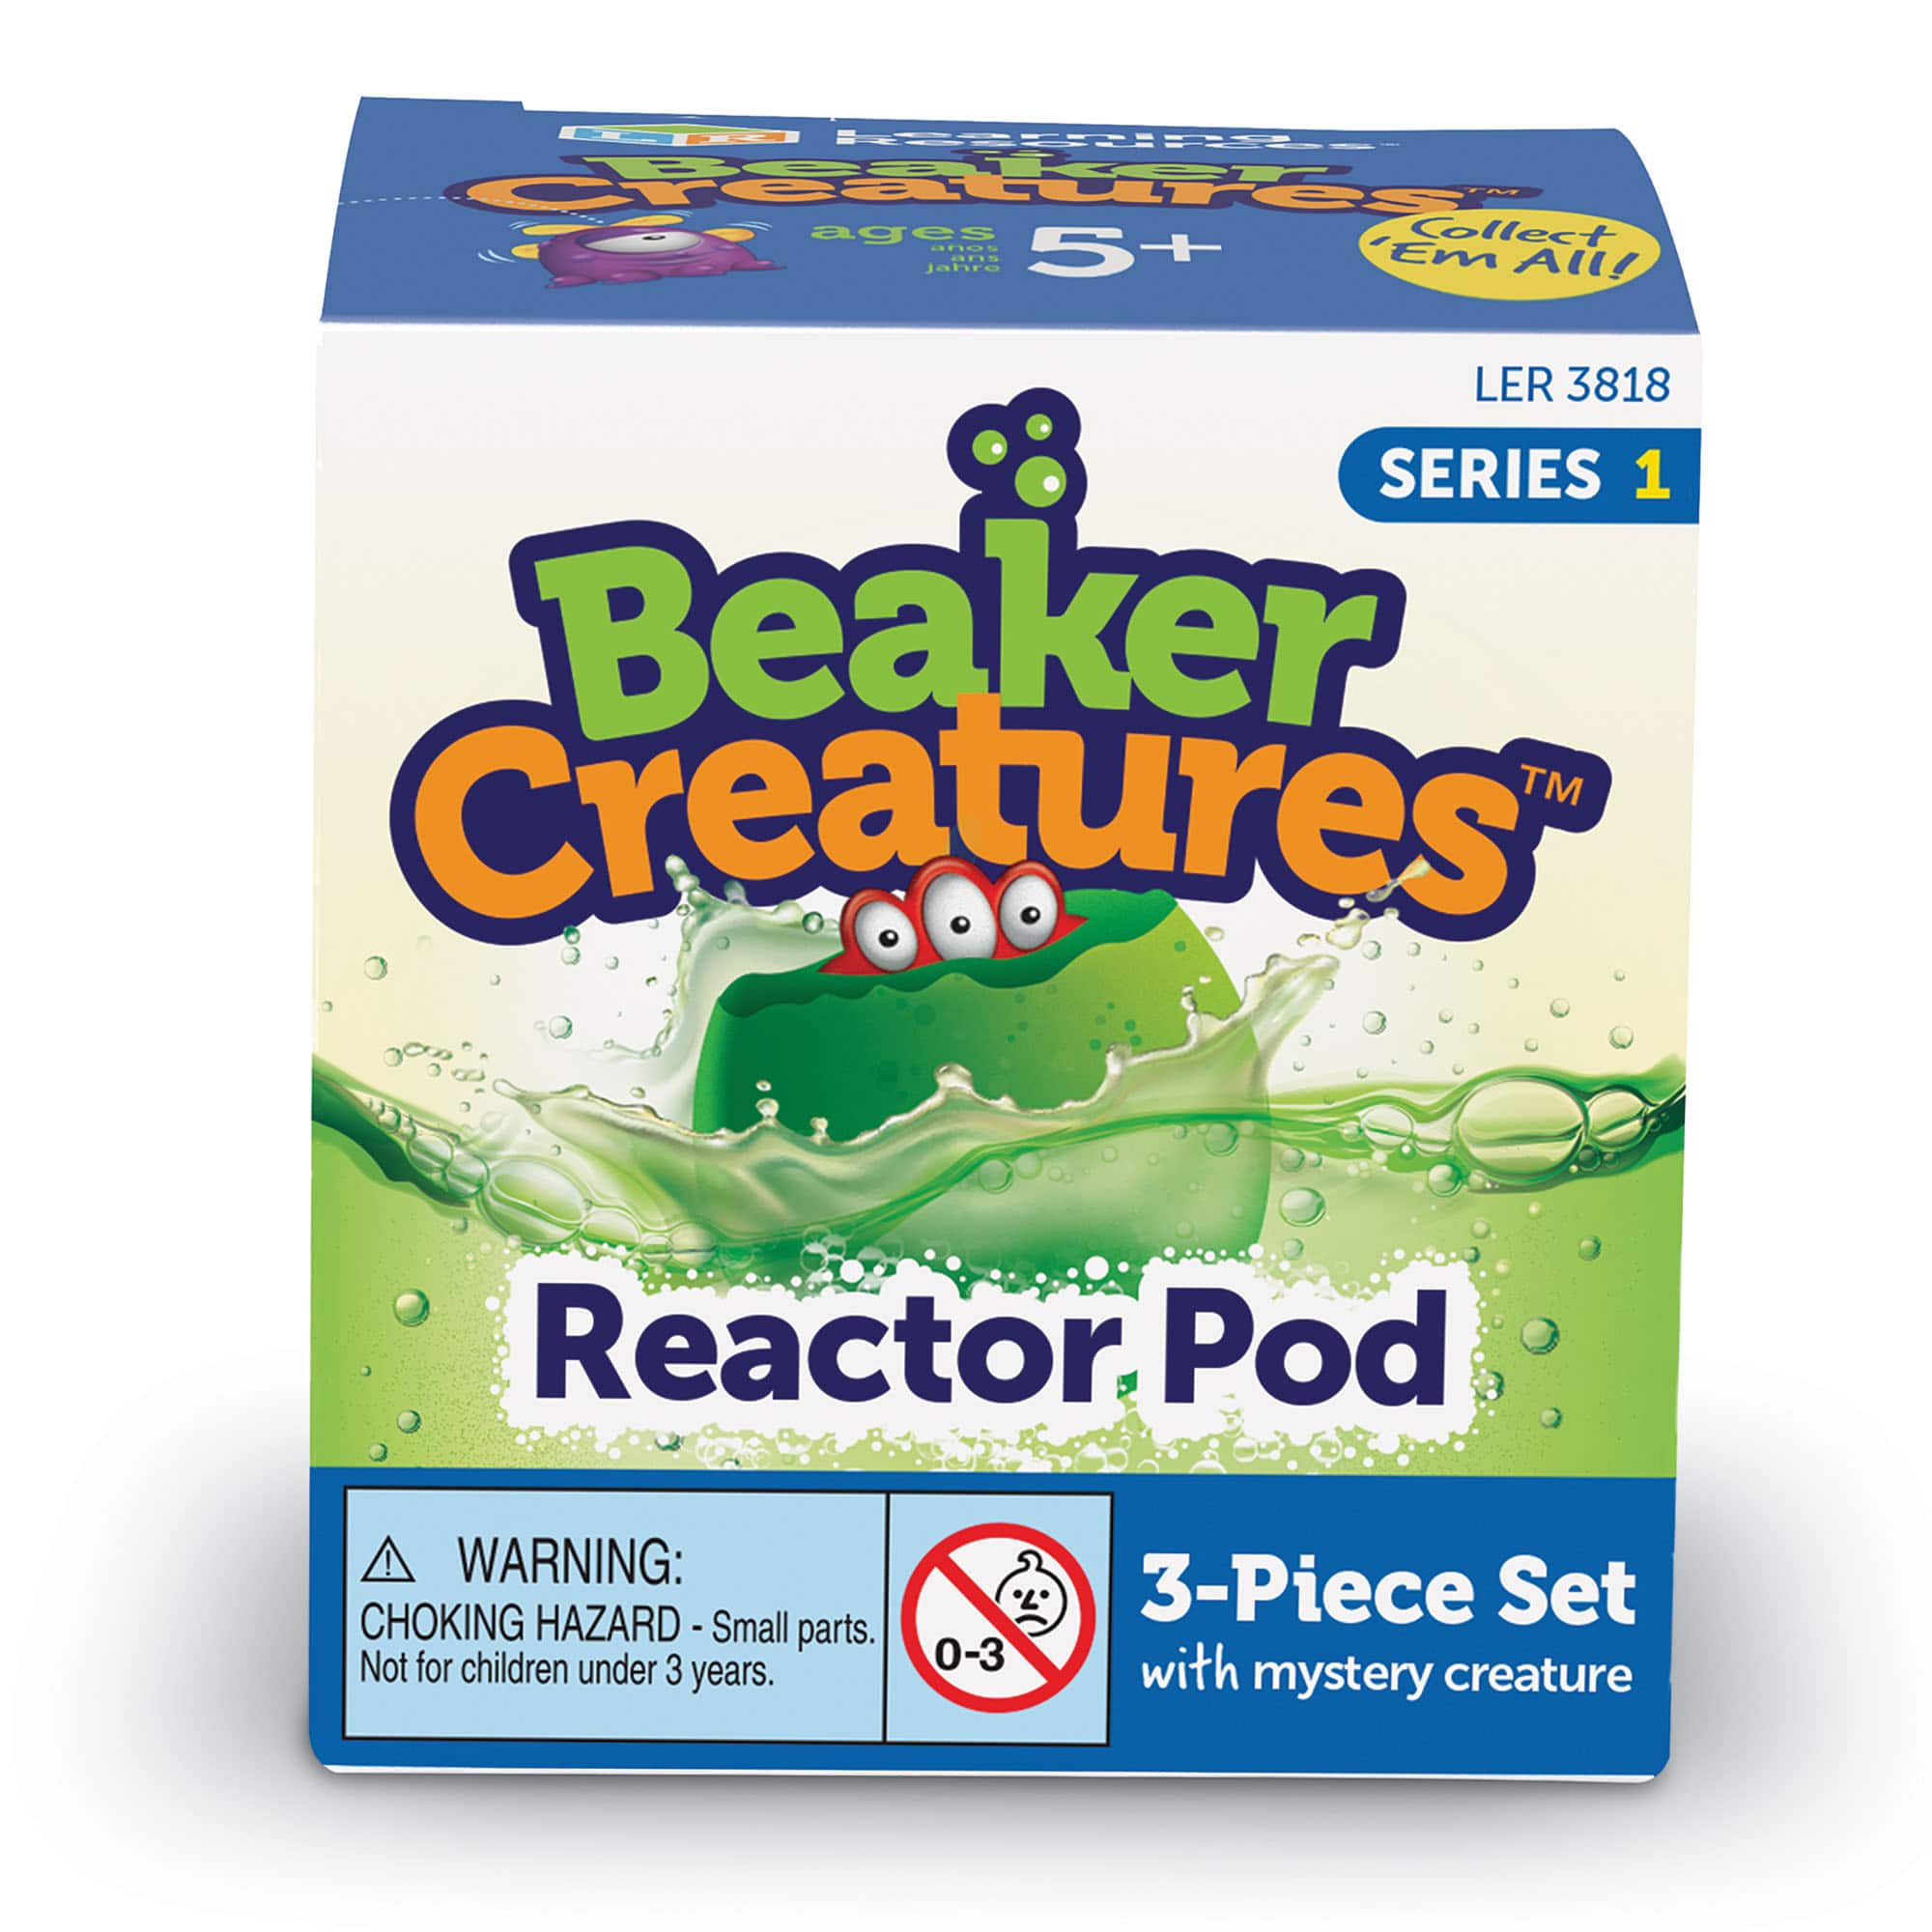 Learning Resources Beaker Creatures Reactor Pods Blind Packs, 24ct.